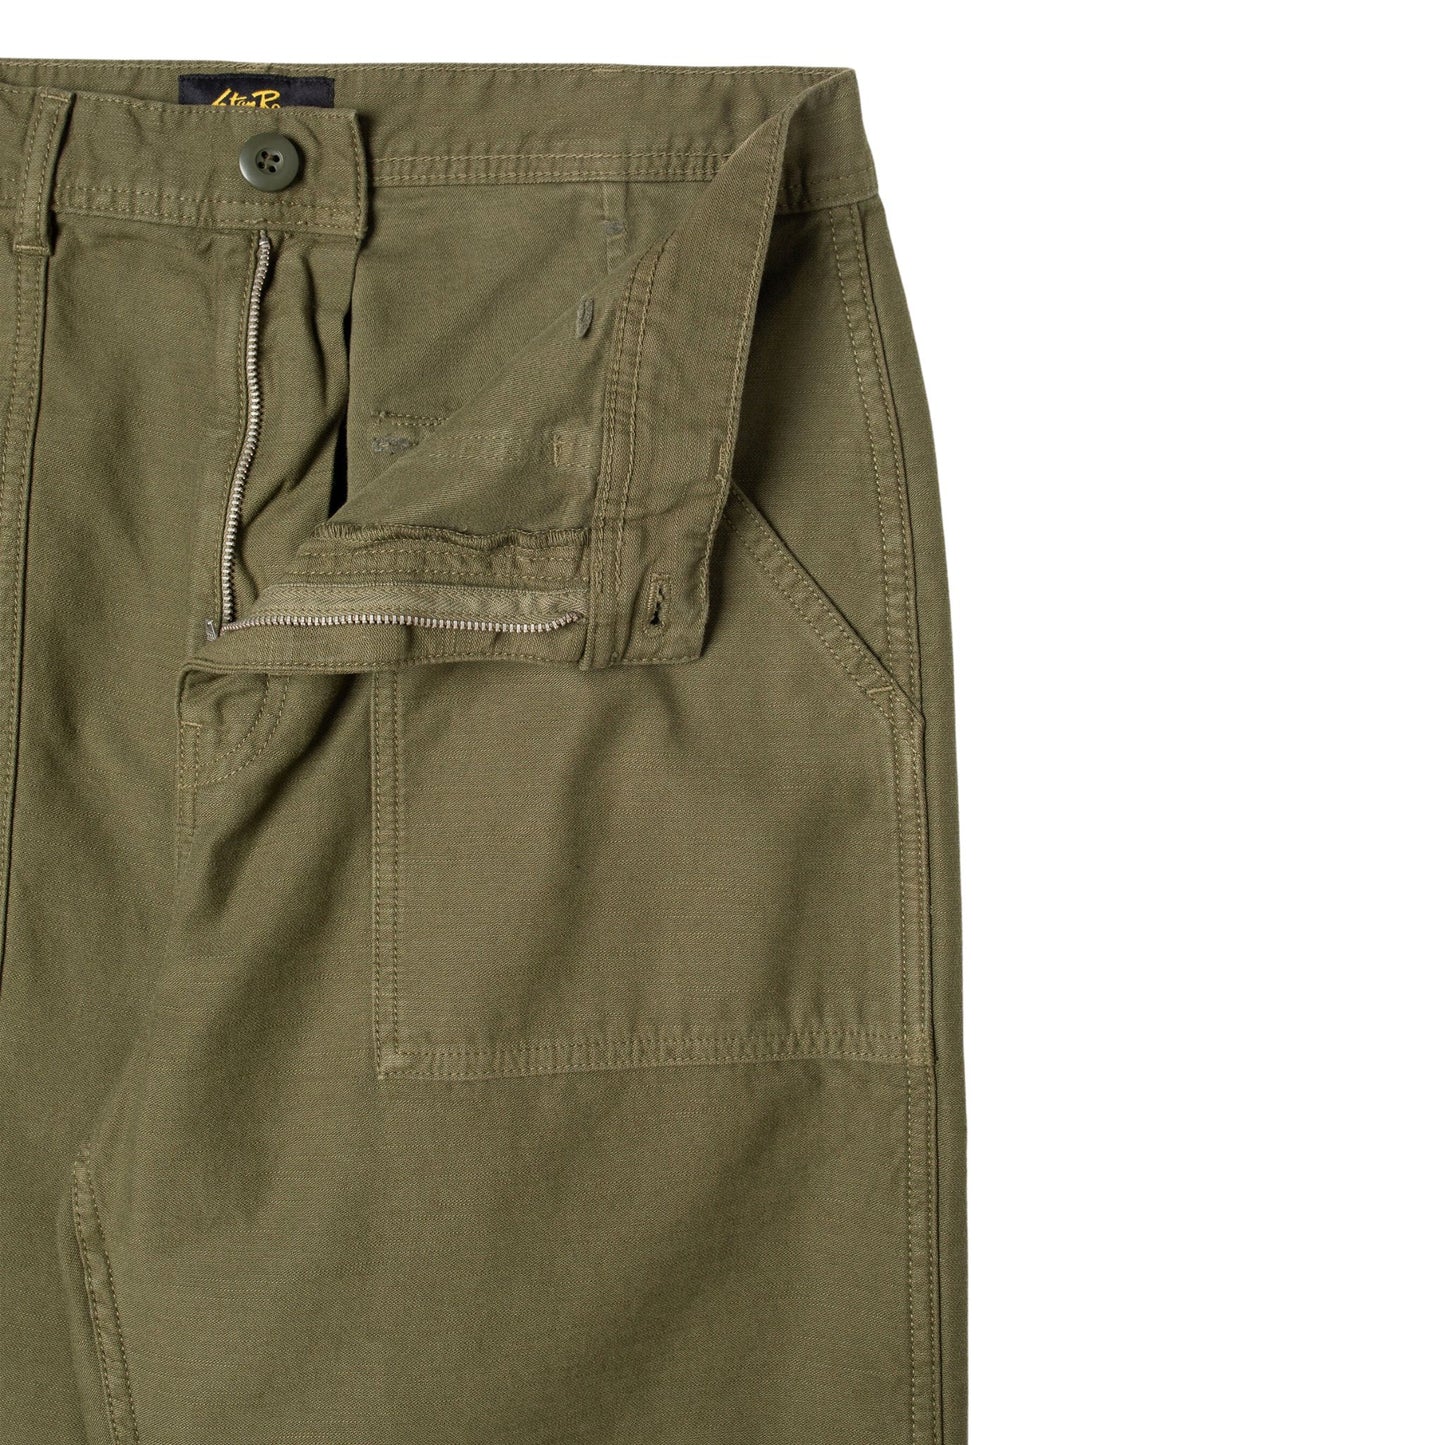 STAN RAY -  Fat Pant Olive Sateen